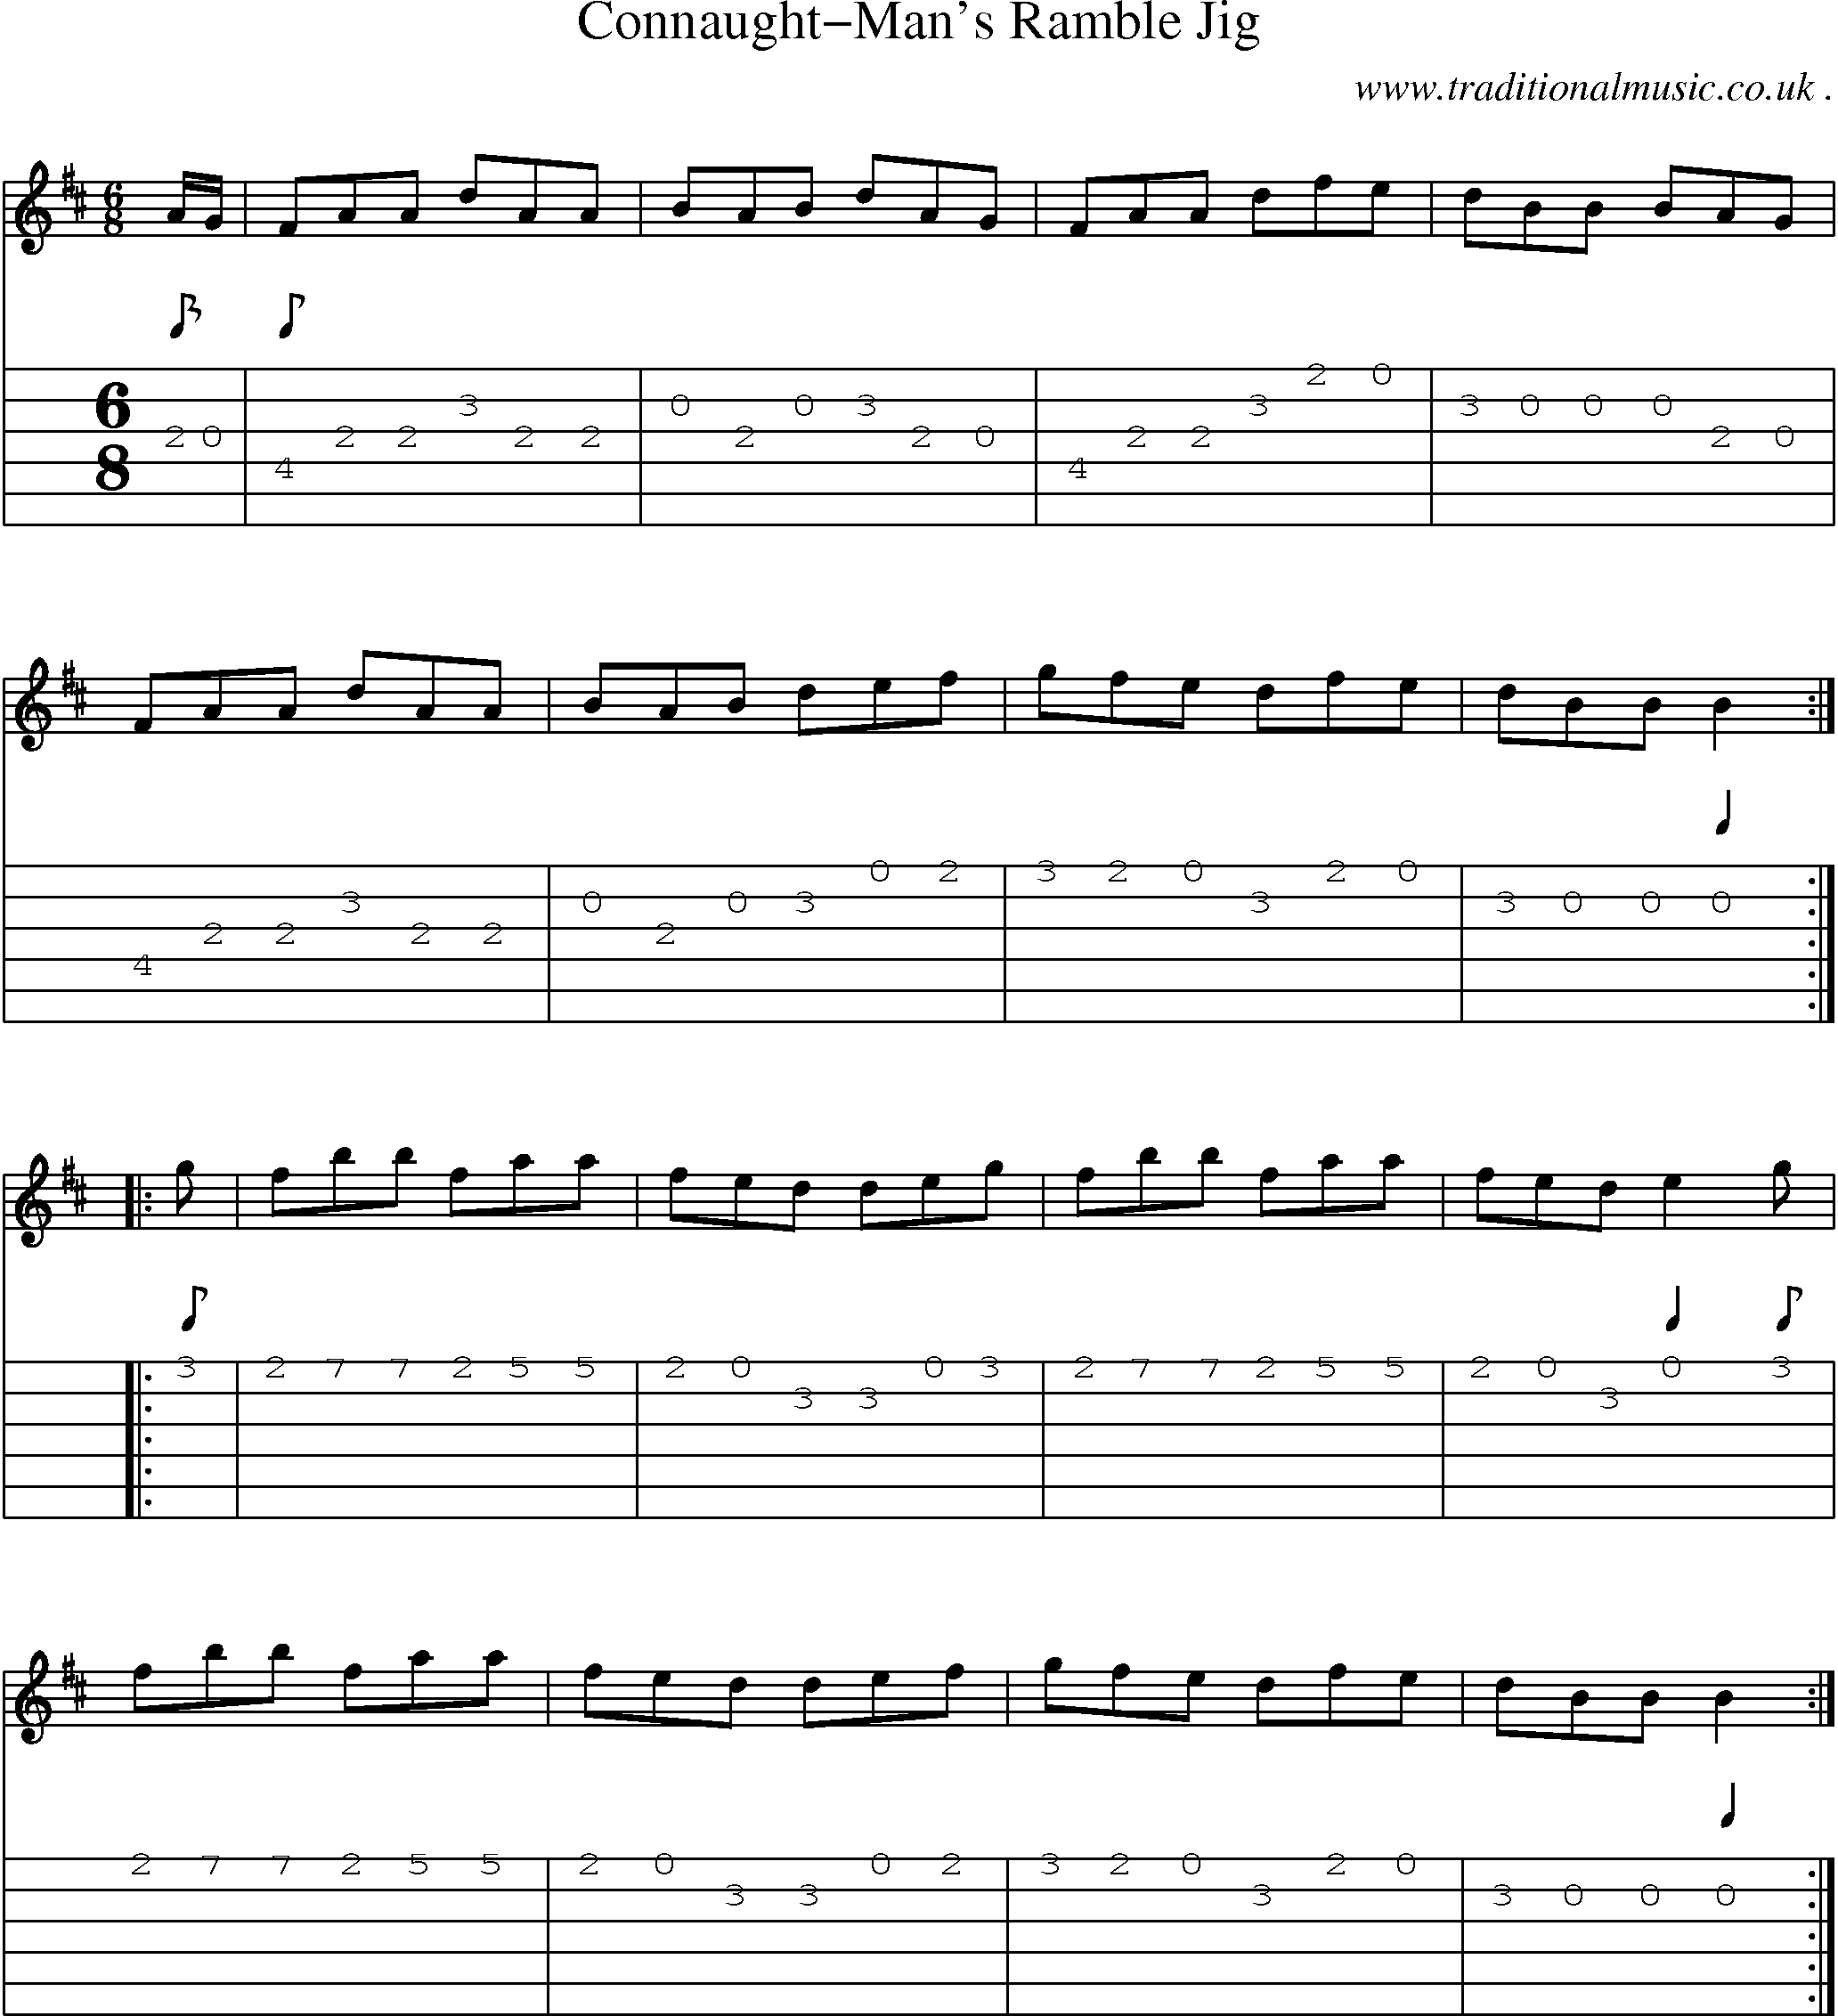 Sheet-Music and Guitar Tabs for Connaught-mans Ramble Jig